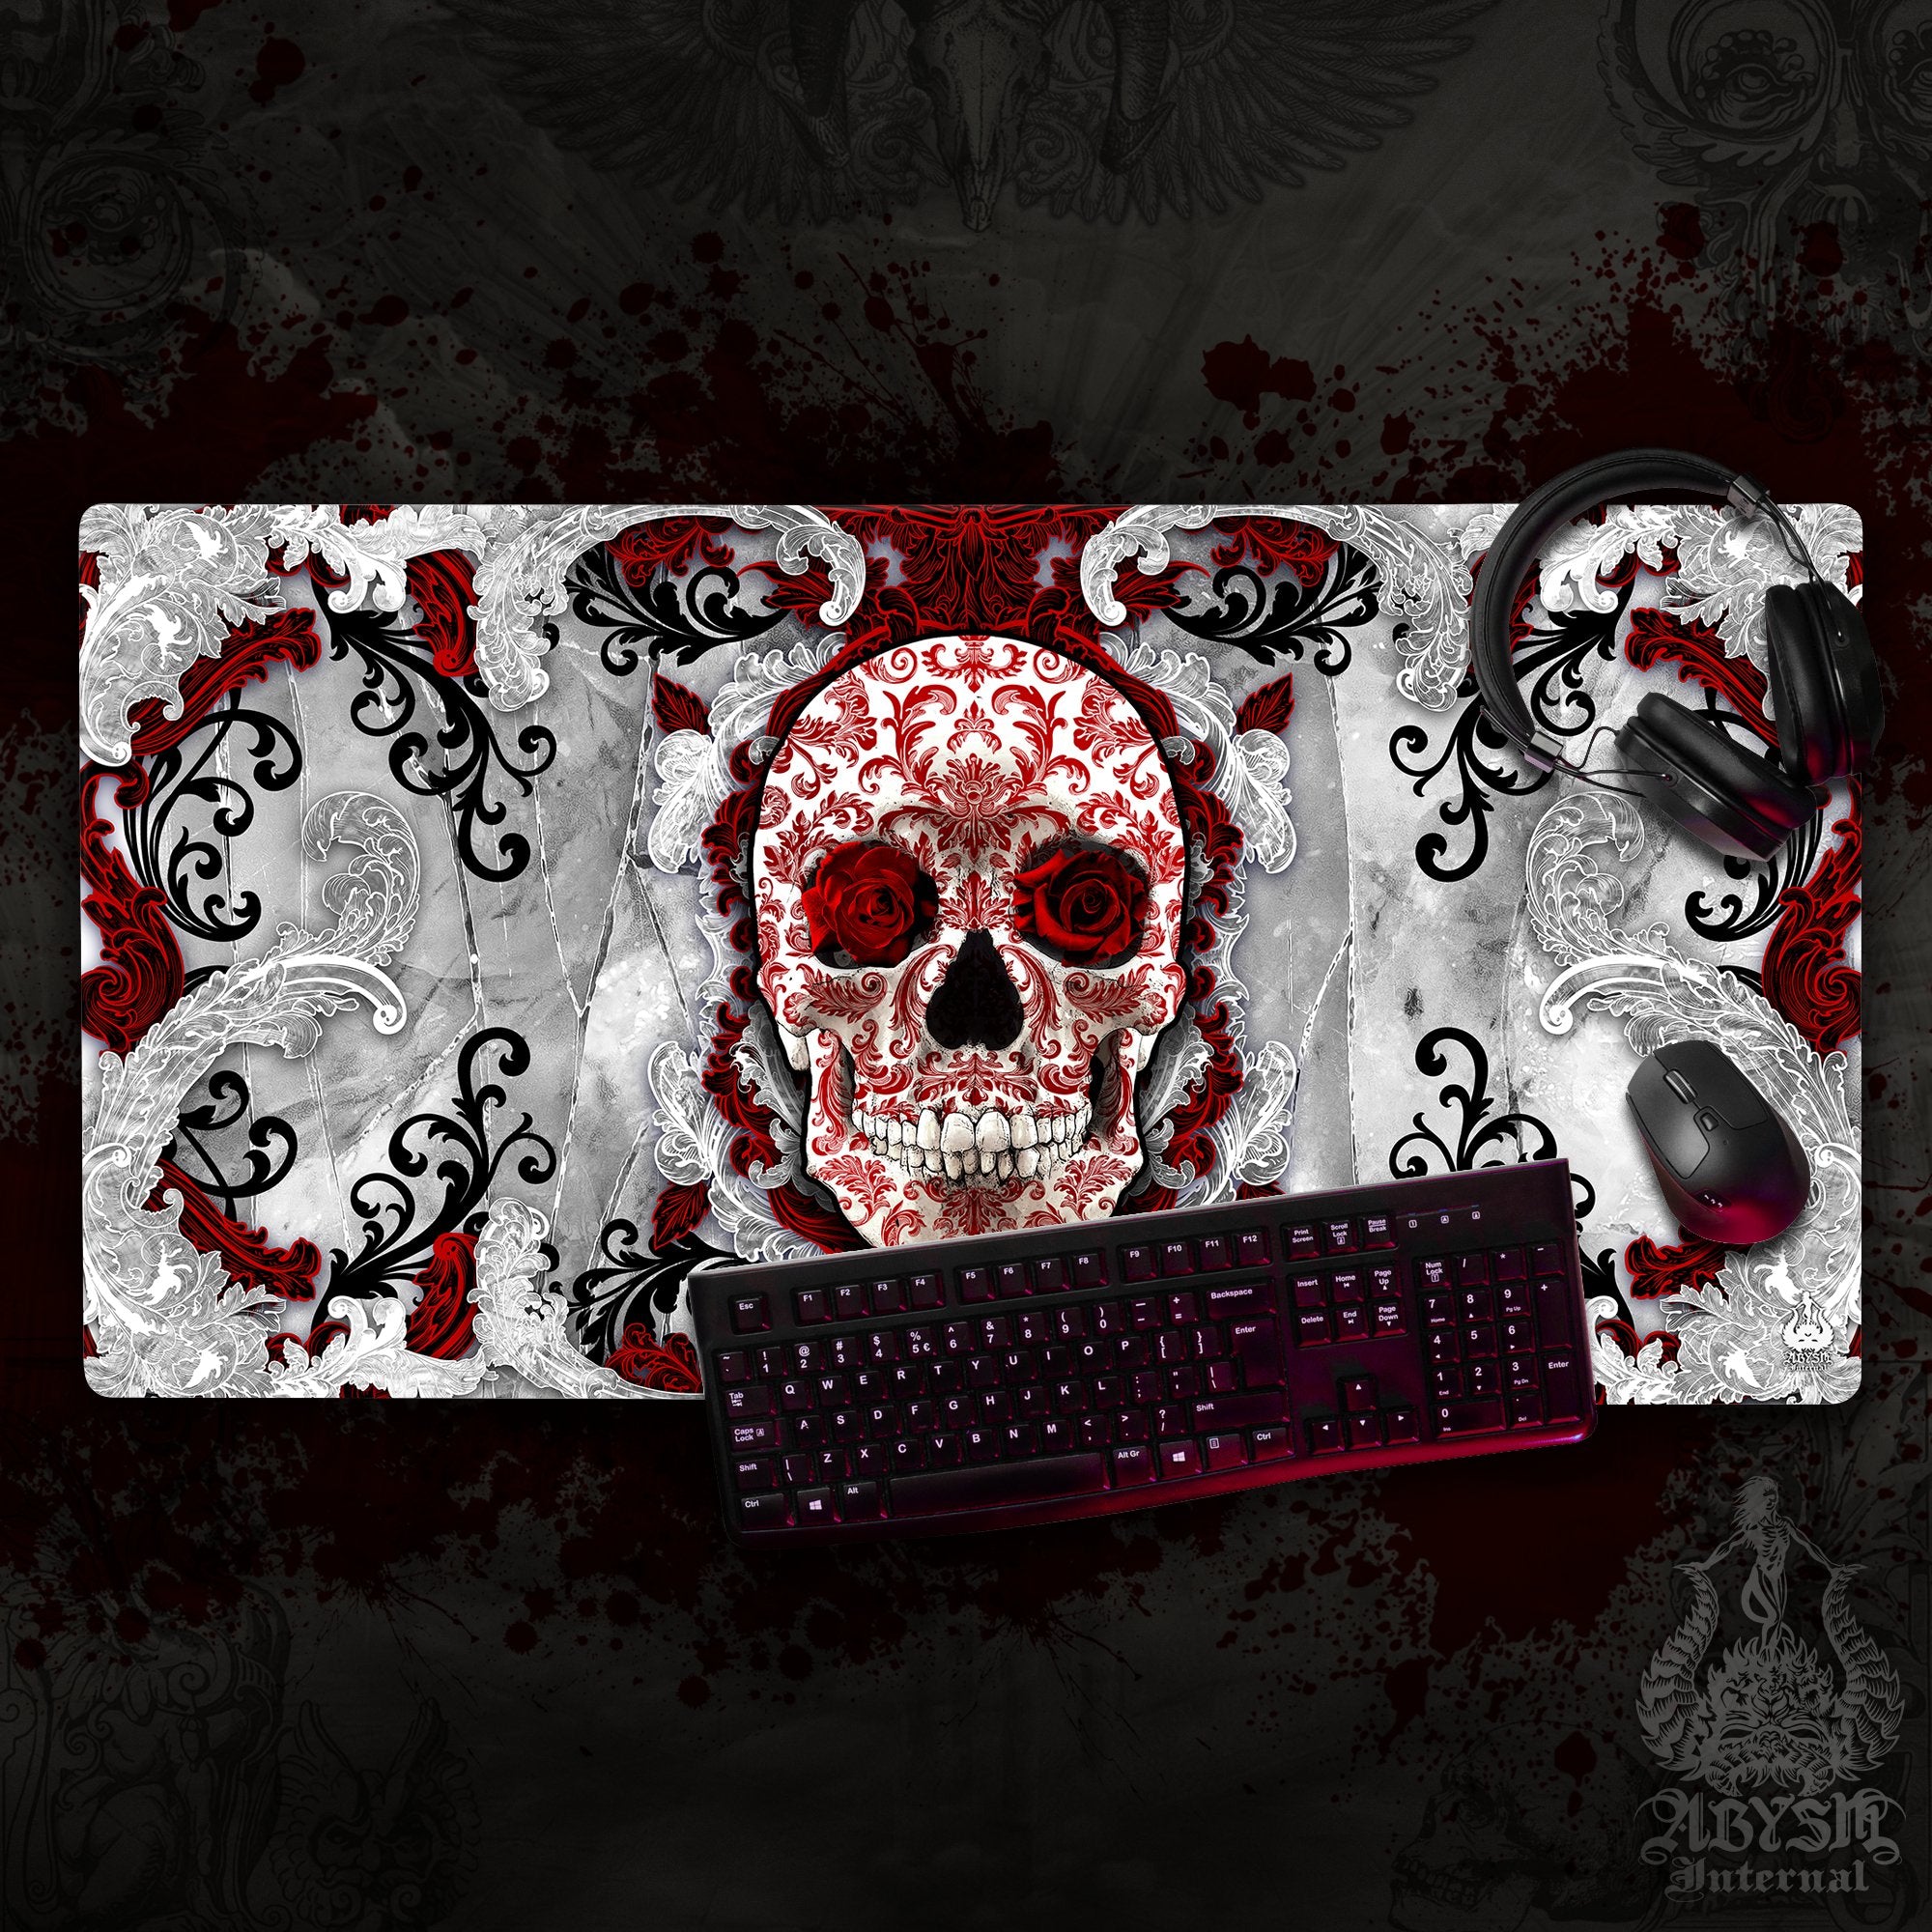 White Mouse Pad, Goth Gaming Desk Mat, Skull Workpad, Bloody Table Protector Cover, Art Print - Abysm Internal